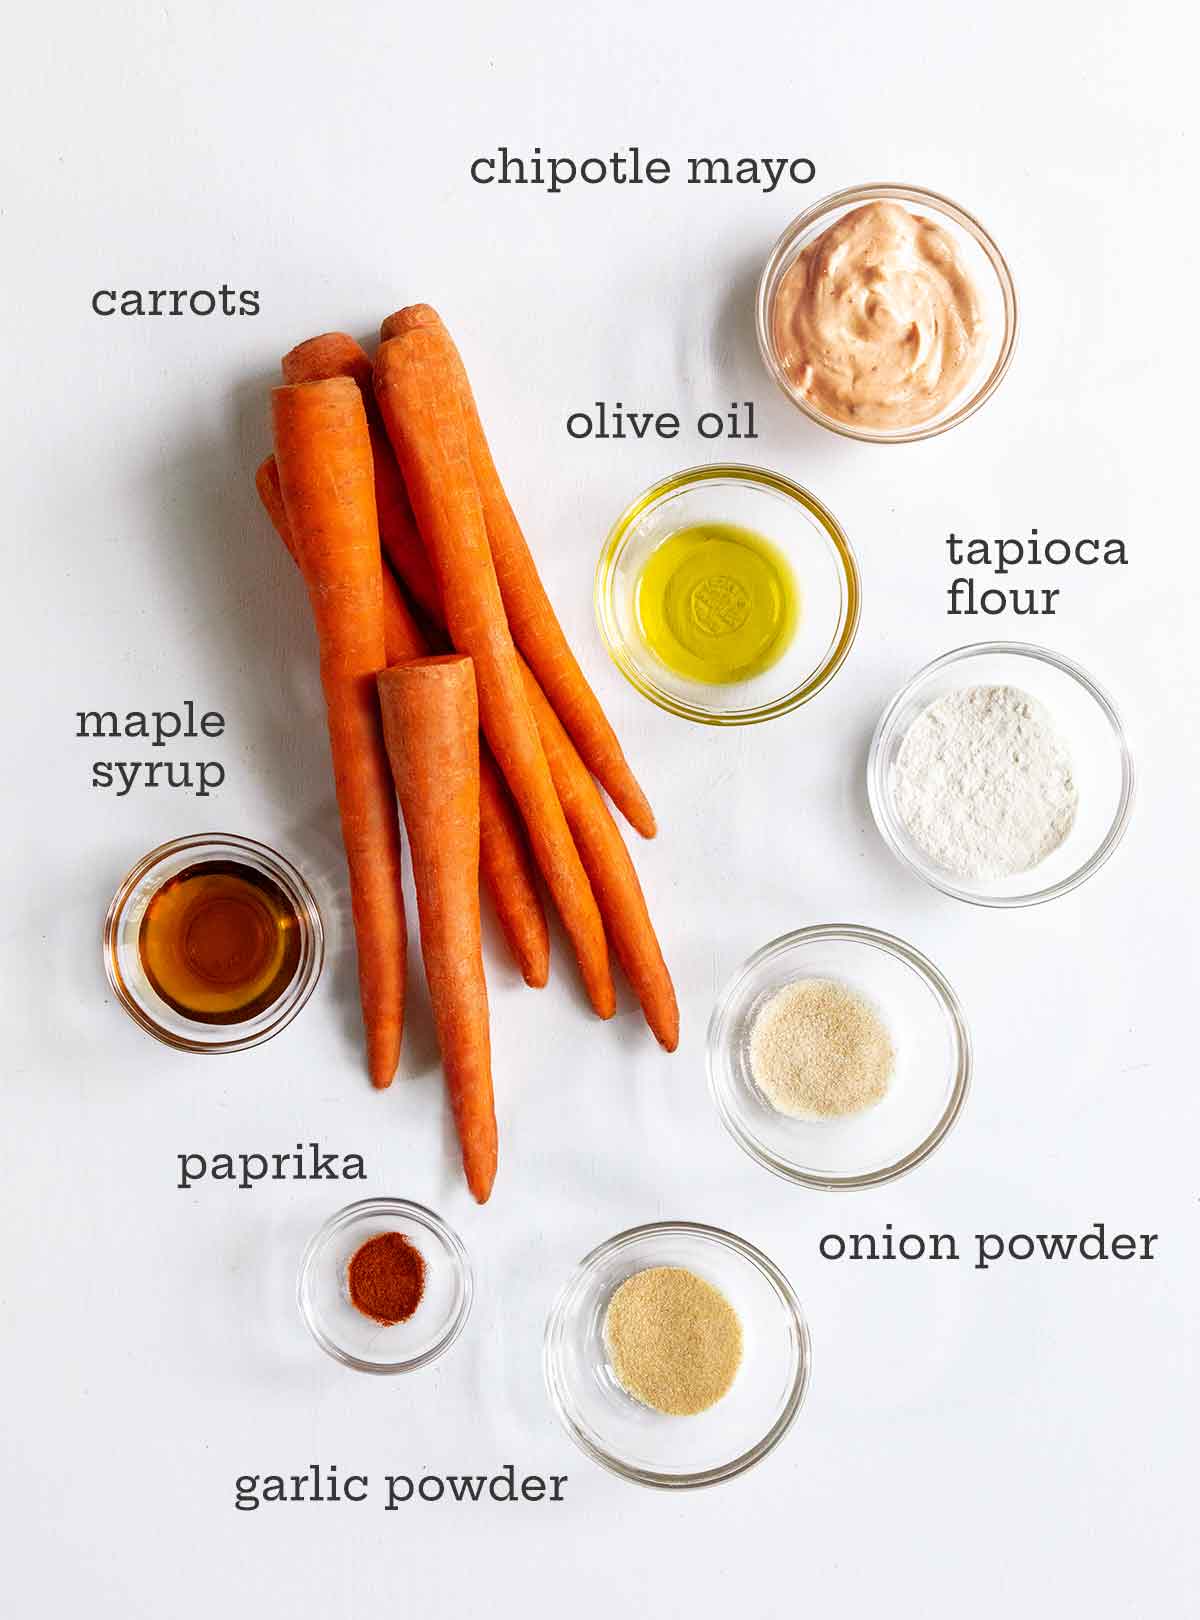 Carrots, mayo, oil, onion powder, garlic powder, maple syrup, and paprika on a white background.